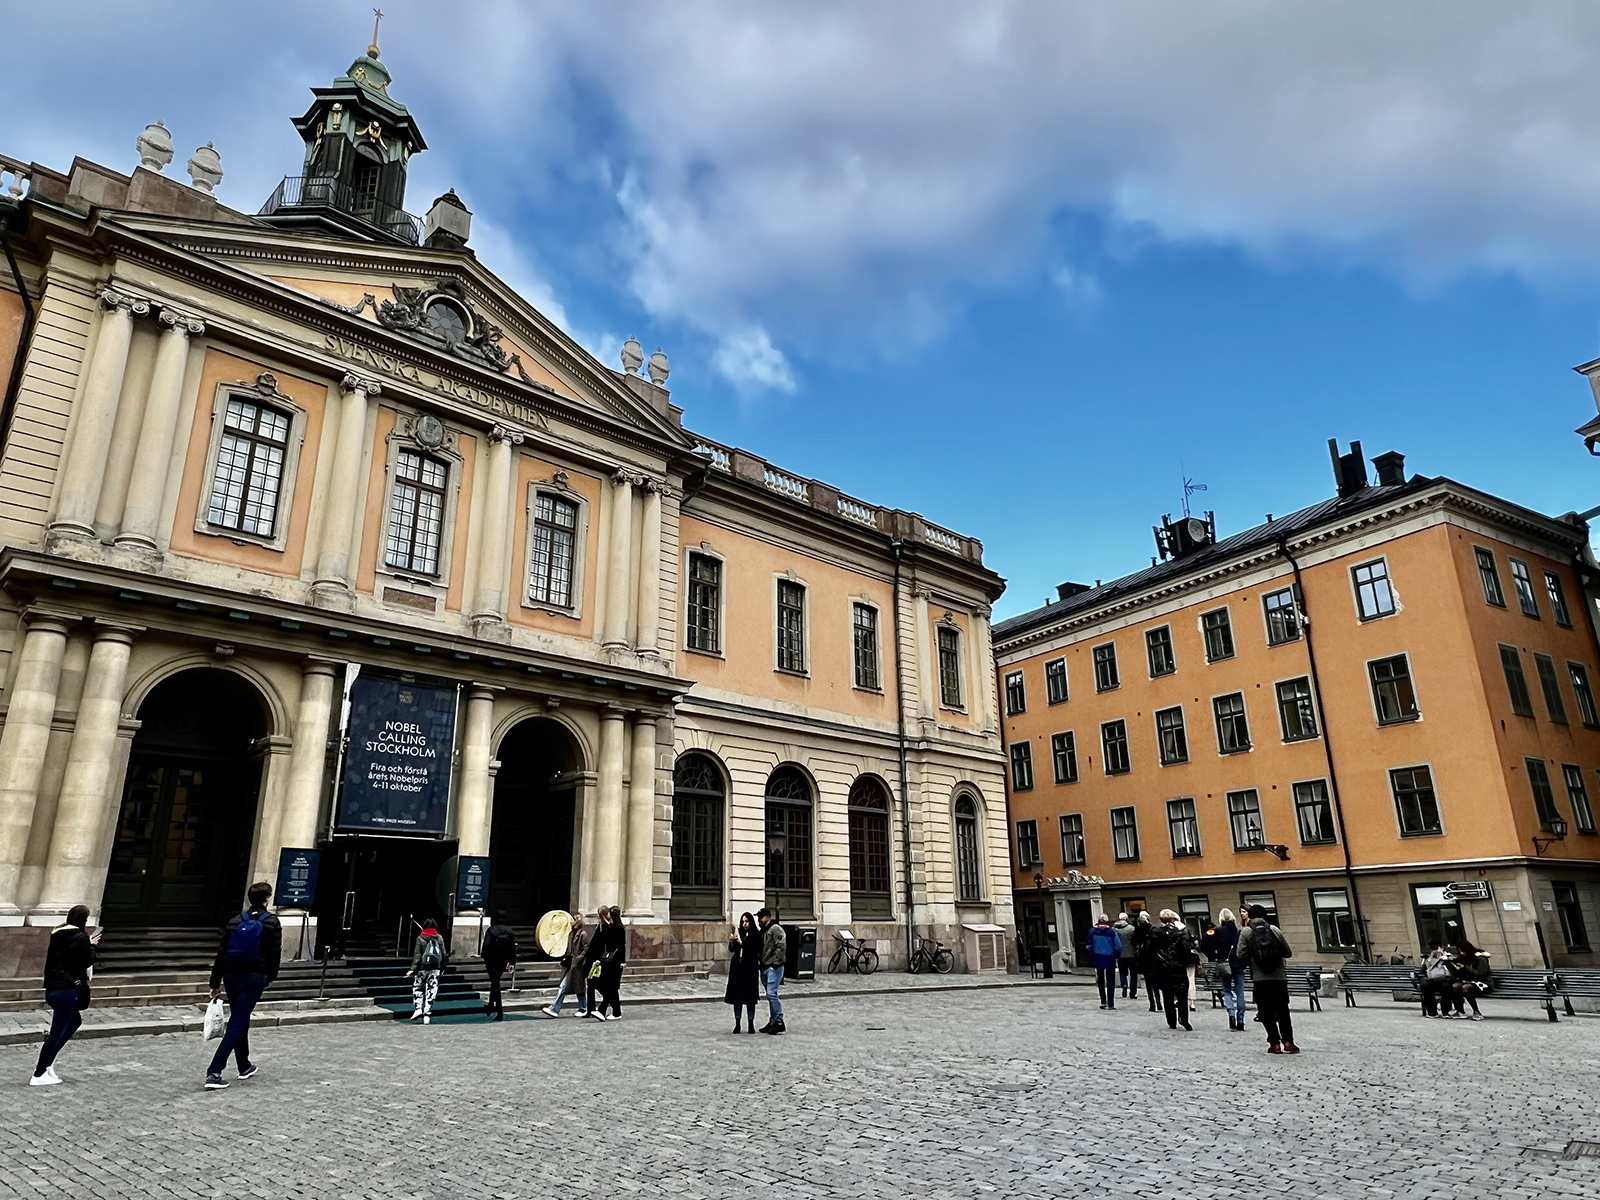 The Nobel Prize Museum